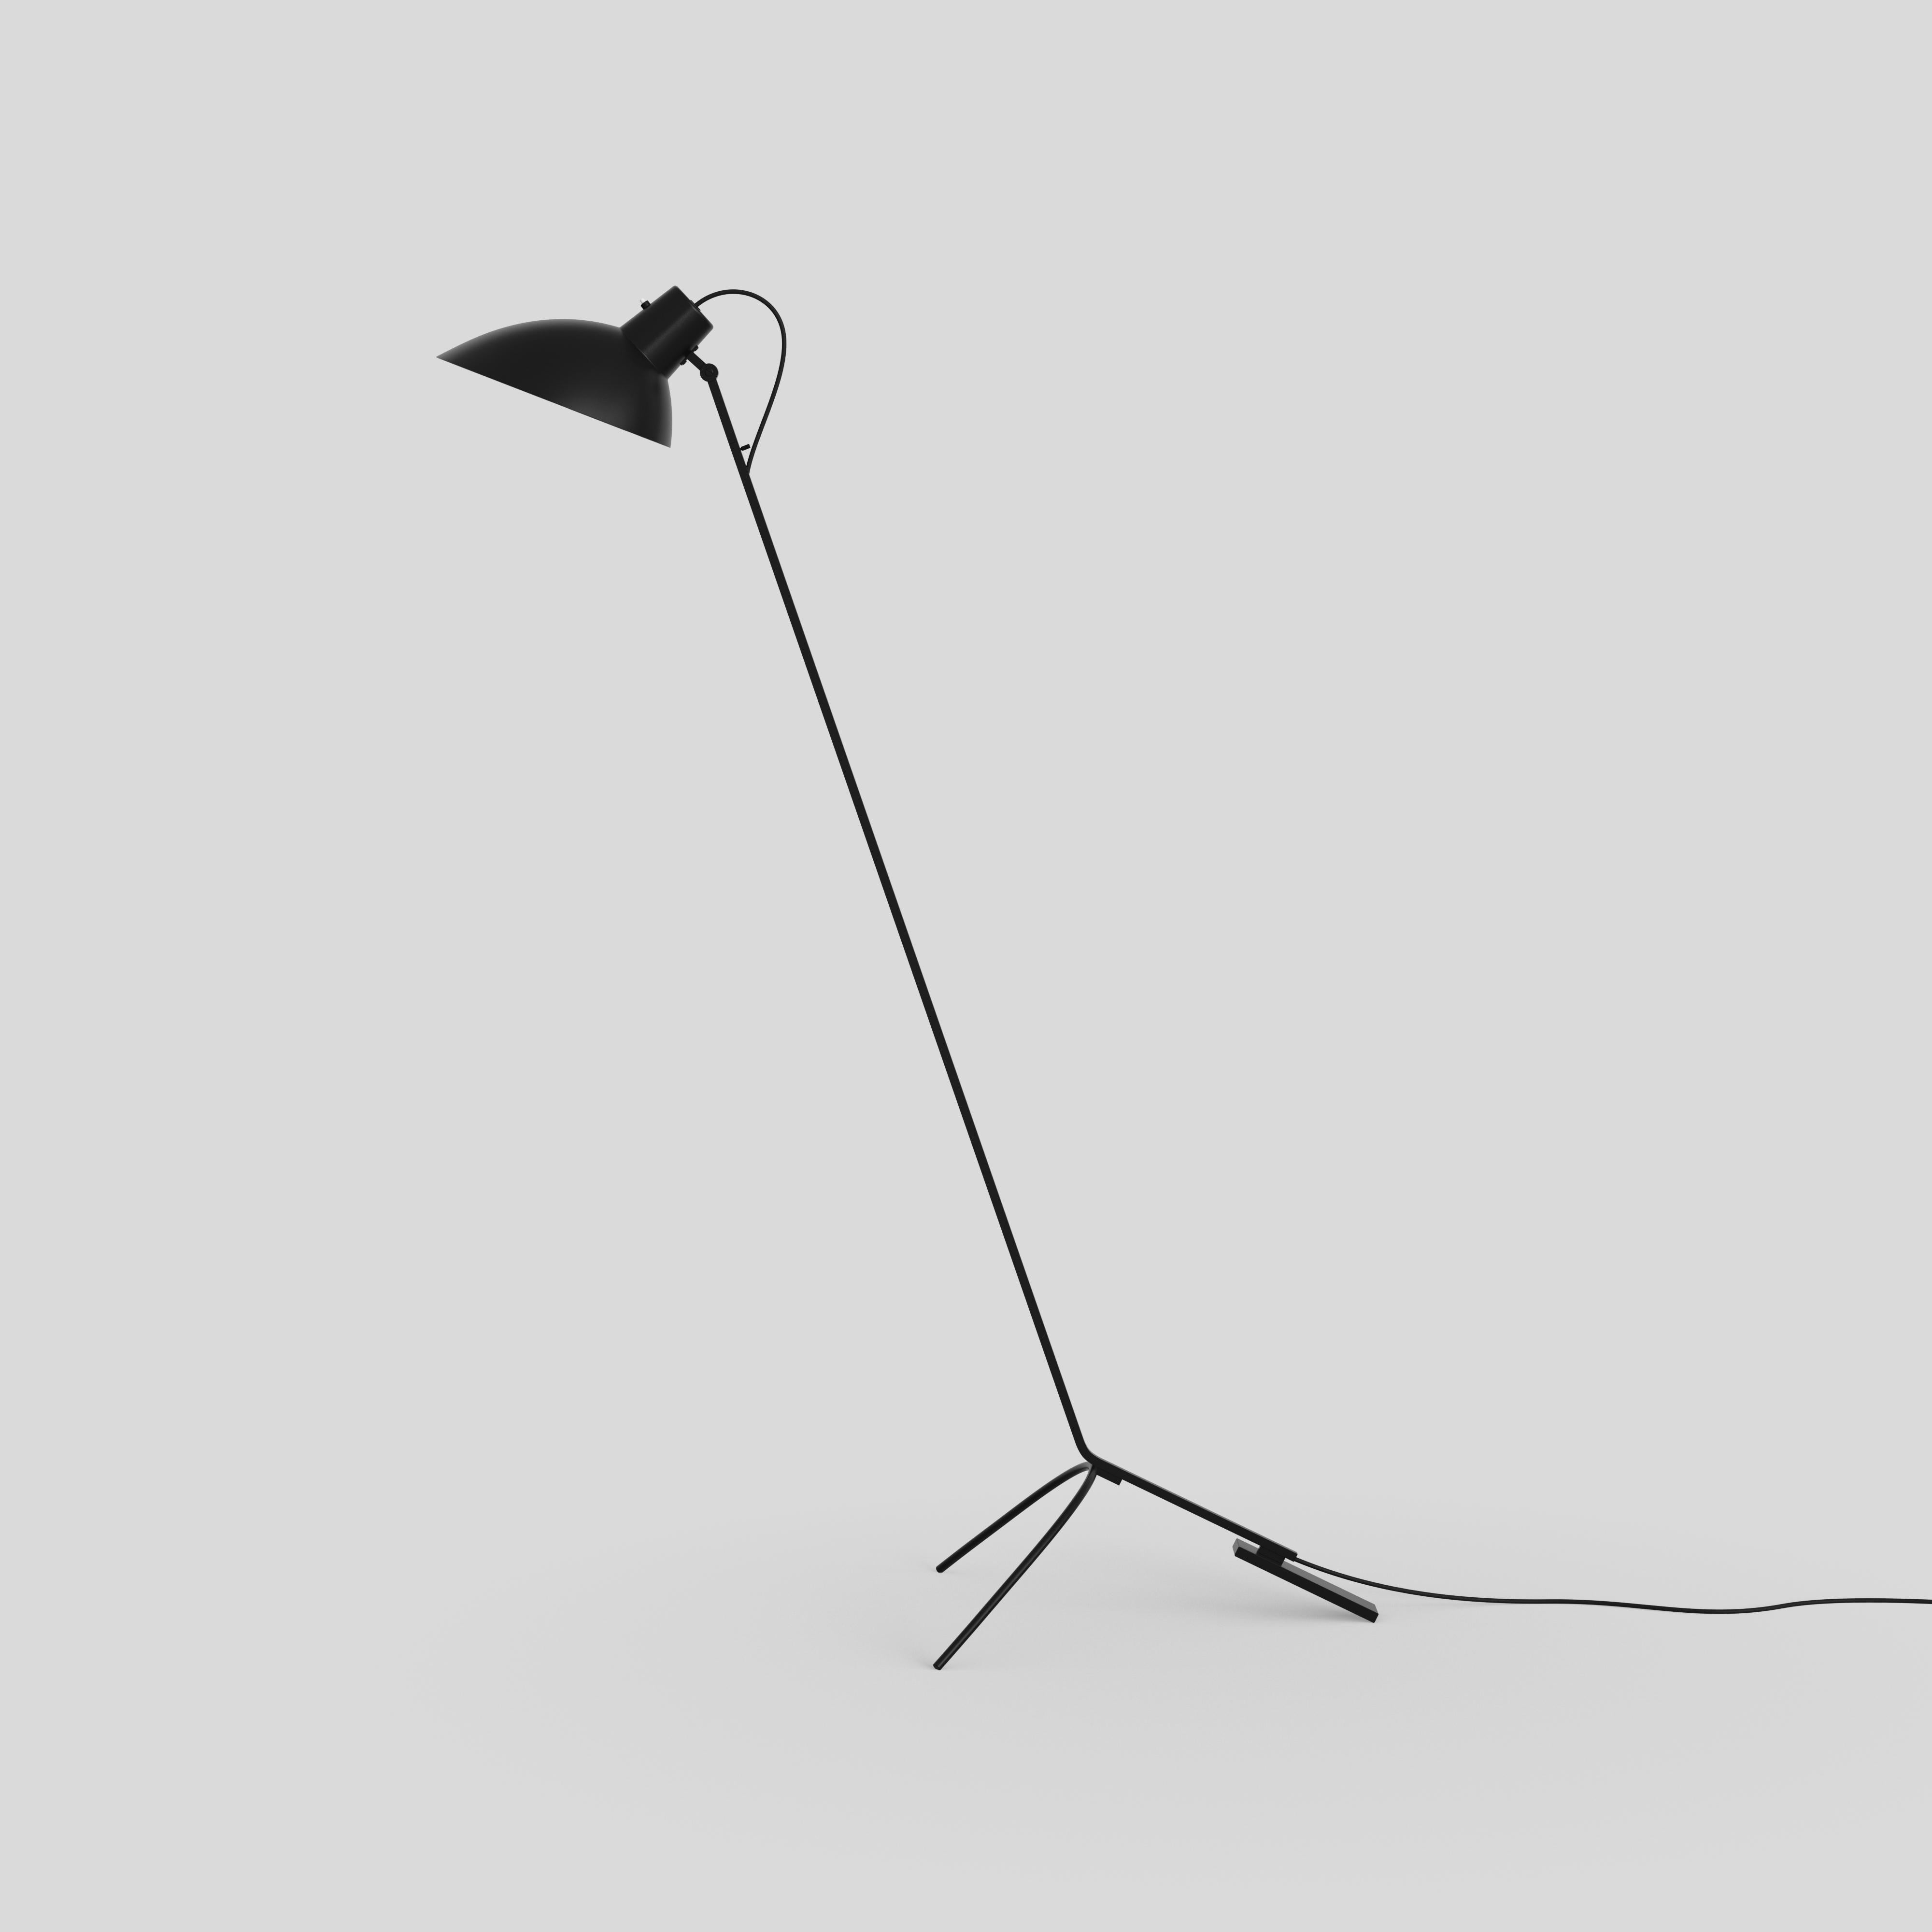 VV Cinquanta floor lamp
Design by Vittoriano Viganò
This version is with black lacquered reflector and black frame.

The VV Cinquanta features an elegant and versatile posable direct light source that can swivel and tilt, from direct working light